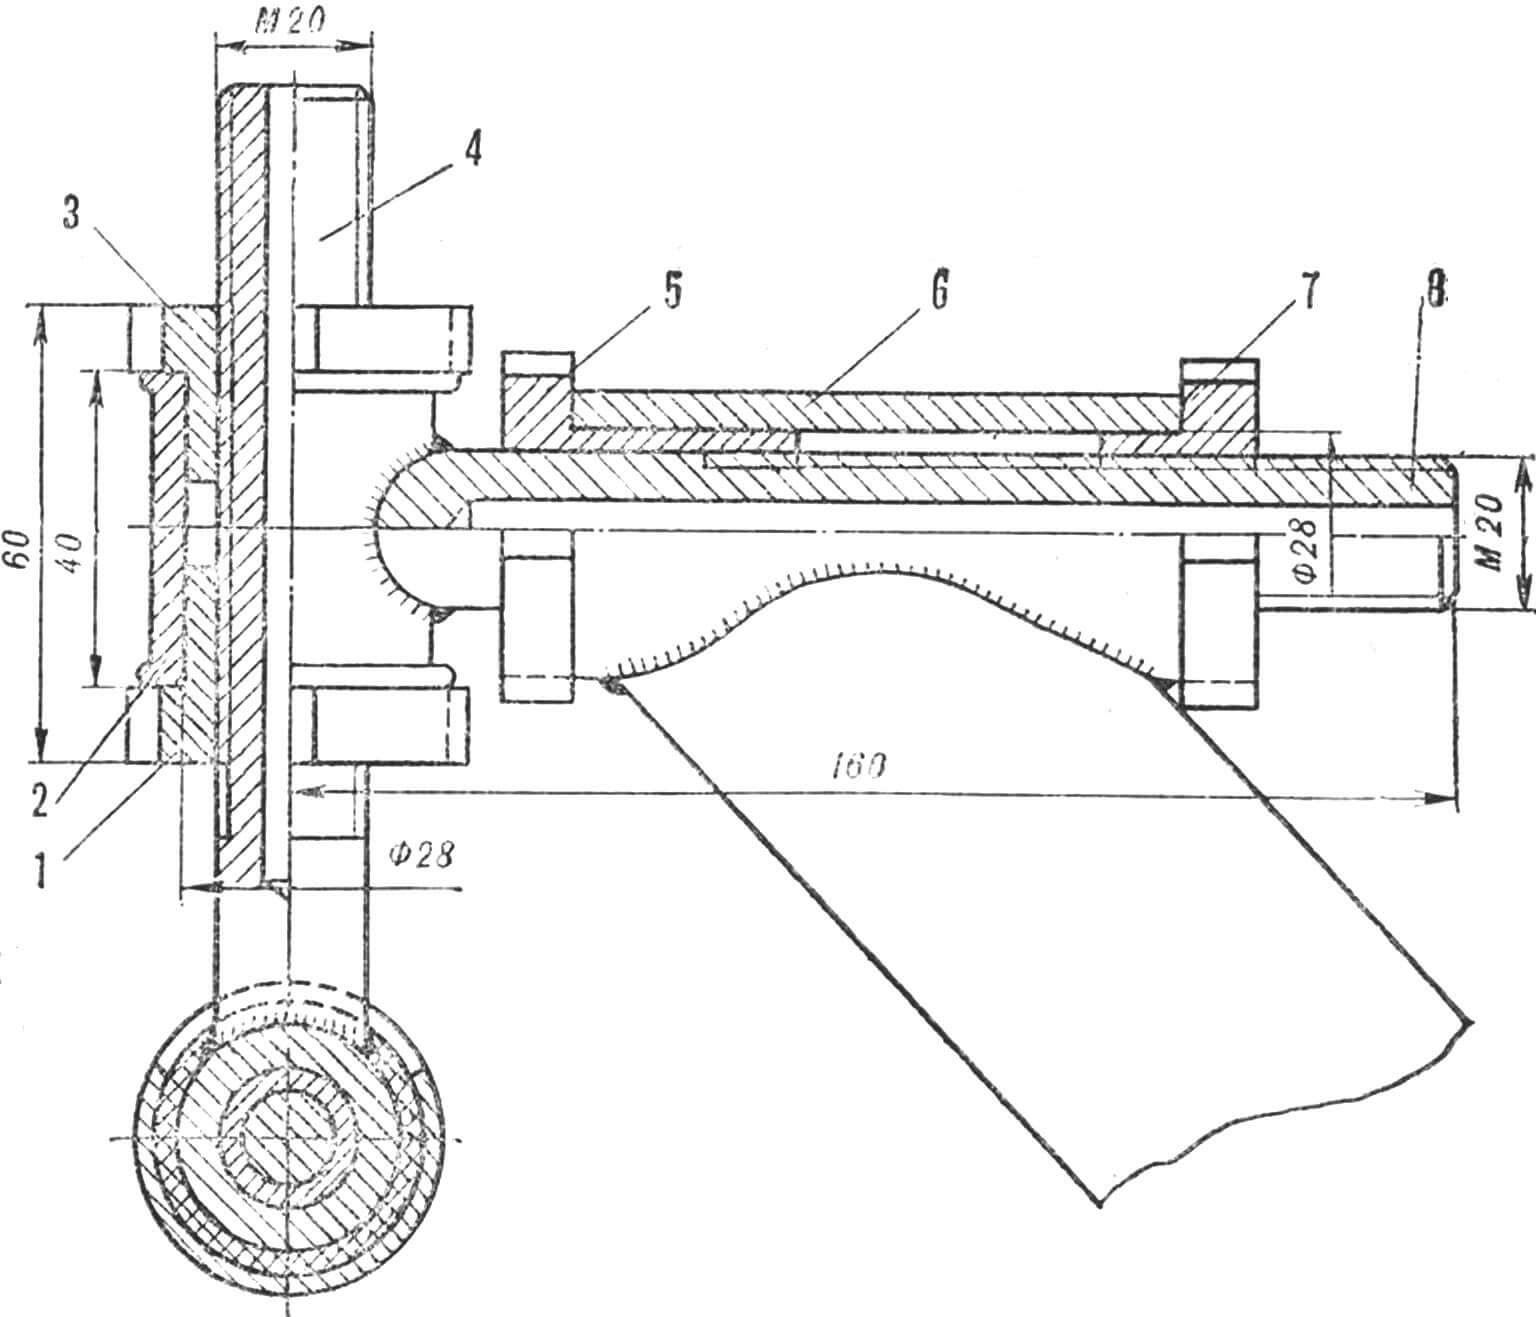 Rice. 8. Mechanism for adjusting the ground clearance and camber of the front wheels